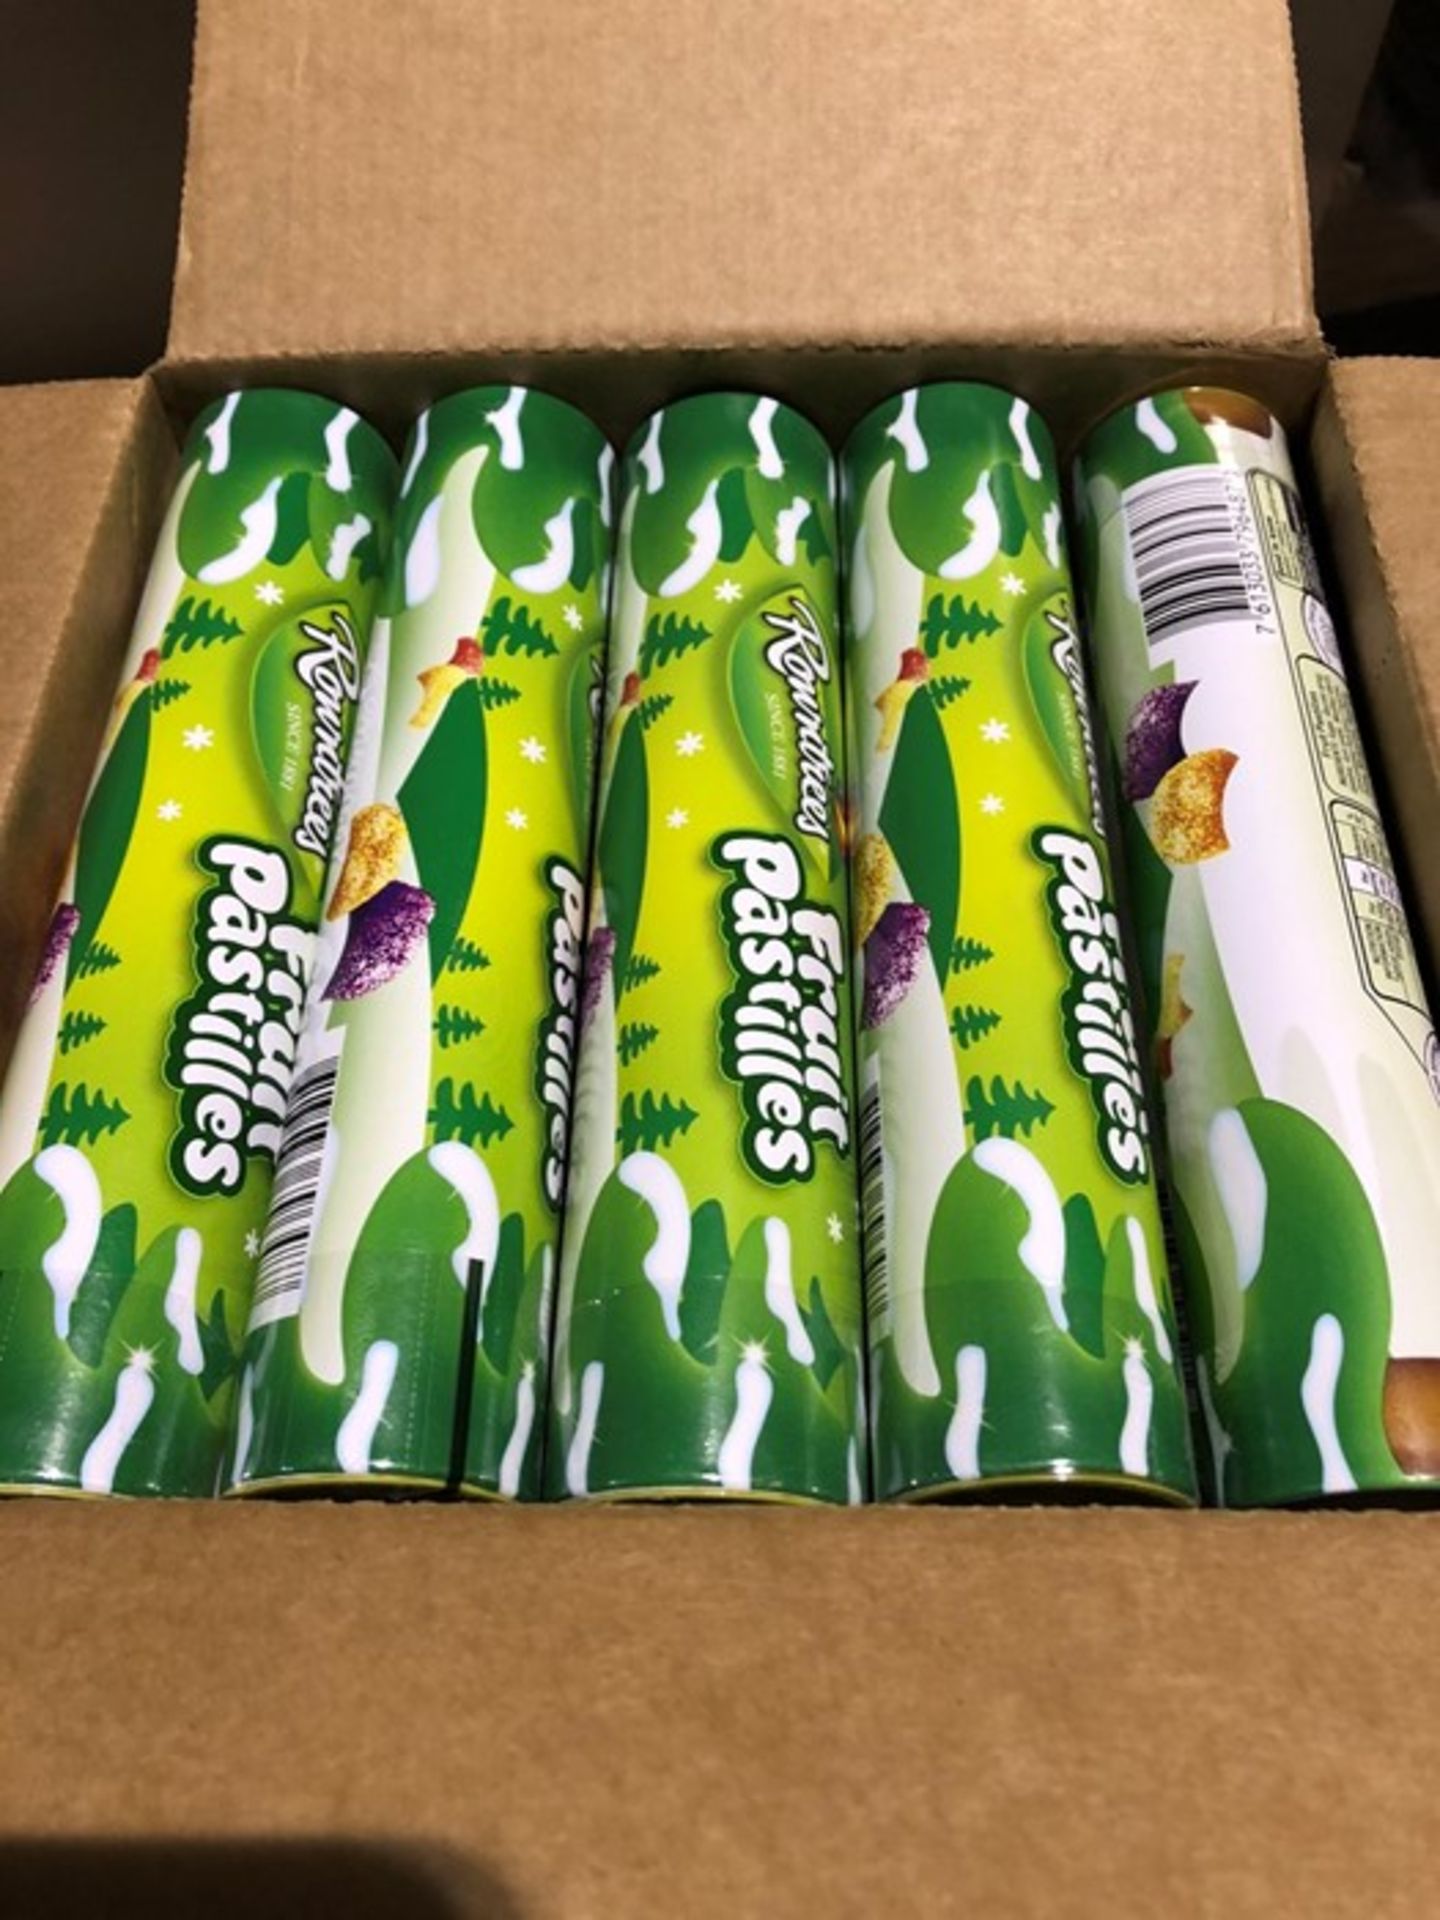 1 LOT TO CONTAIN 15 BOXED TUBES OF ROUNDTREES FRUIT PASTILLES / BEST BEFORE: 08/2019 (PUBLIC VIEWING